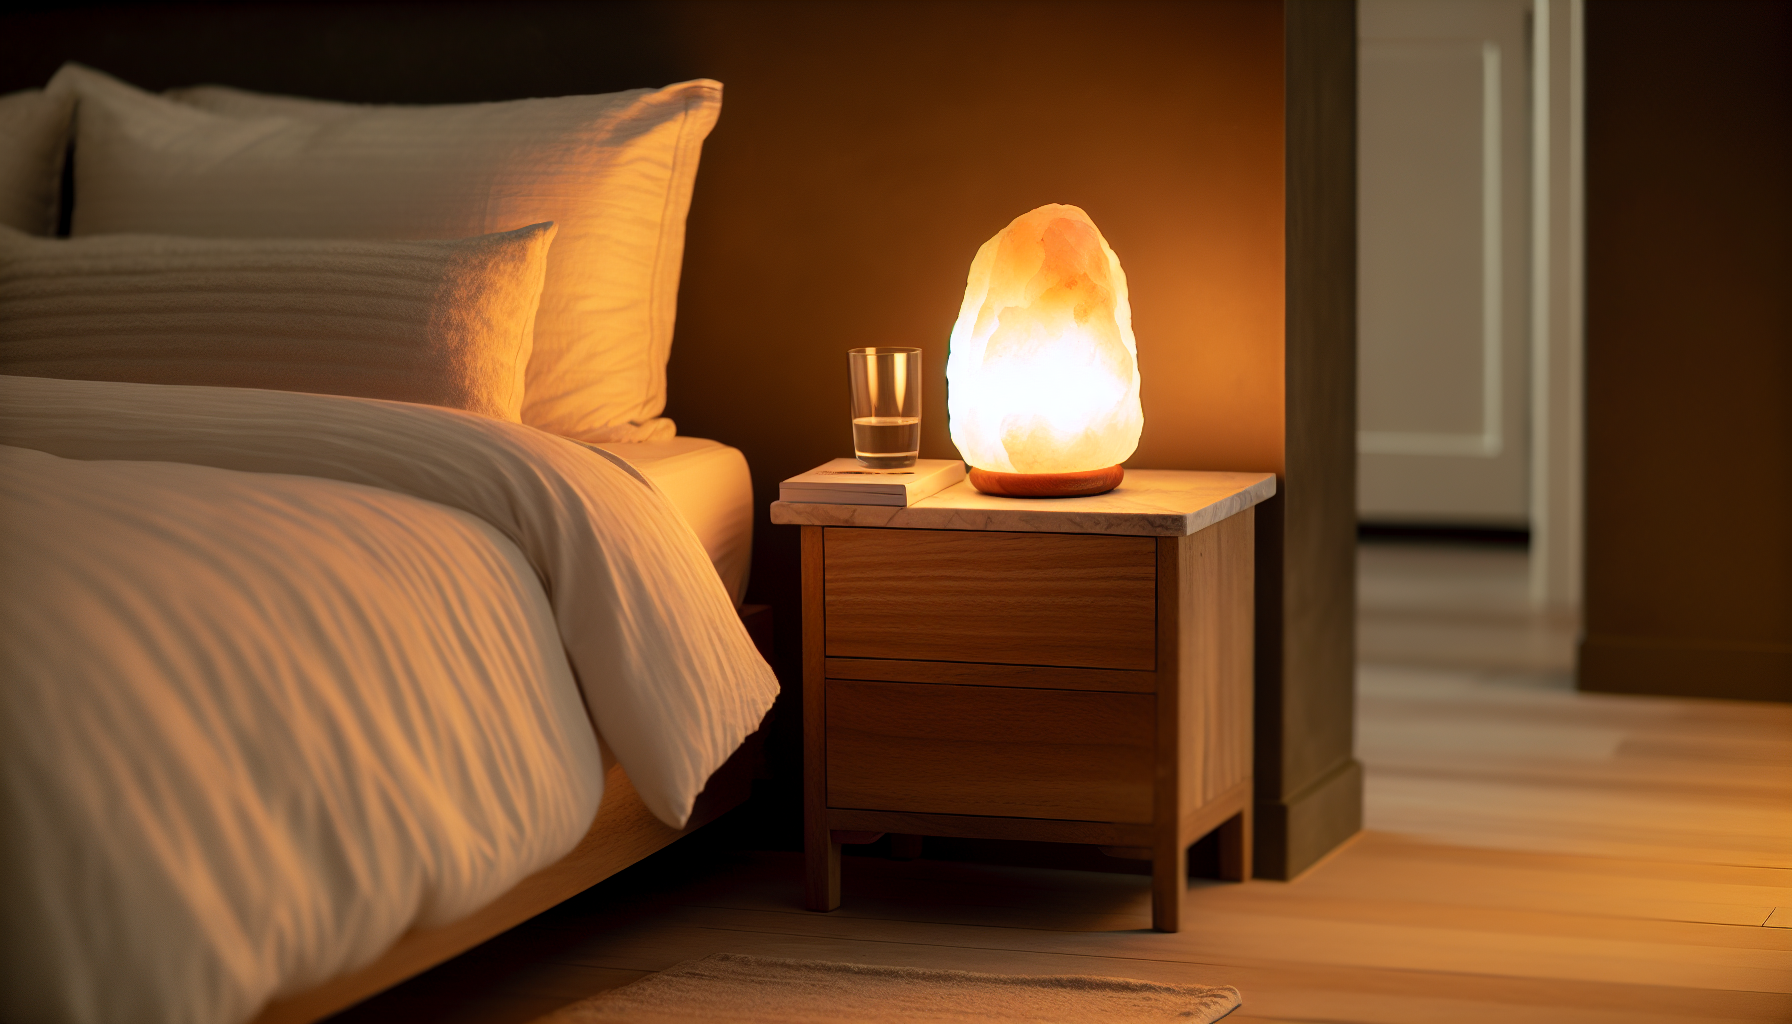 A serene bedroom with a white Himalayan salt lamp emitting a calming glow